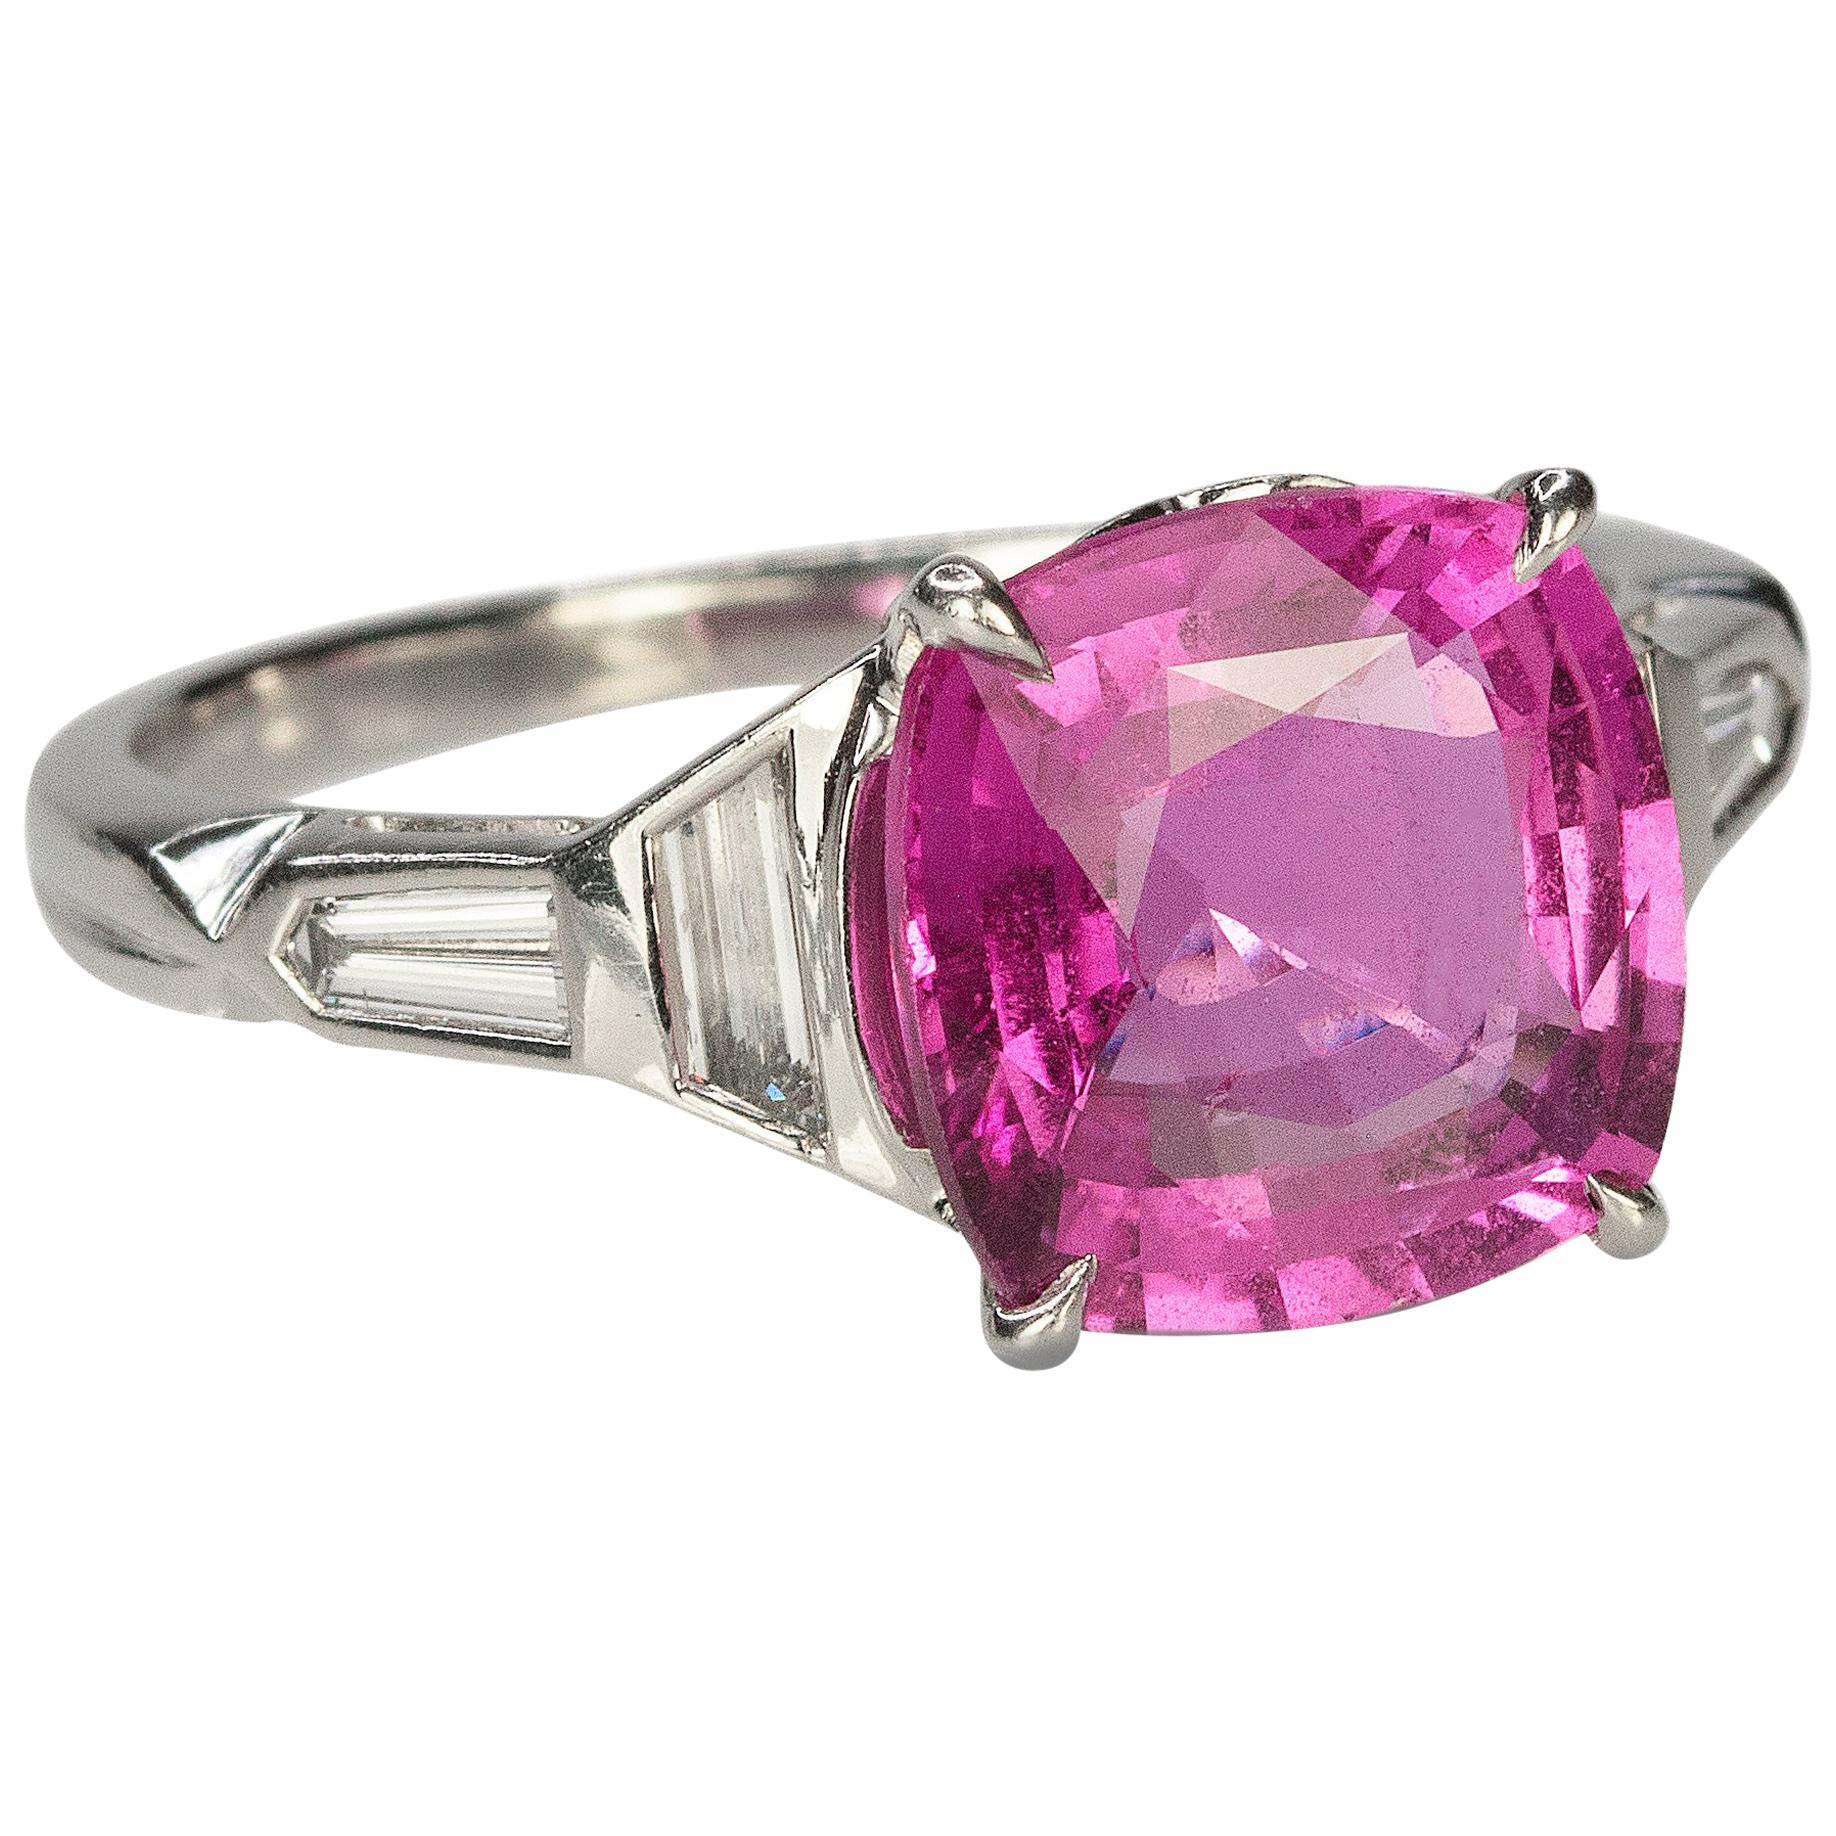 Platinum Art Deco Ring with Pink Sapphire